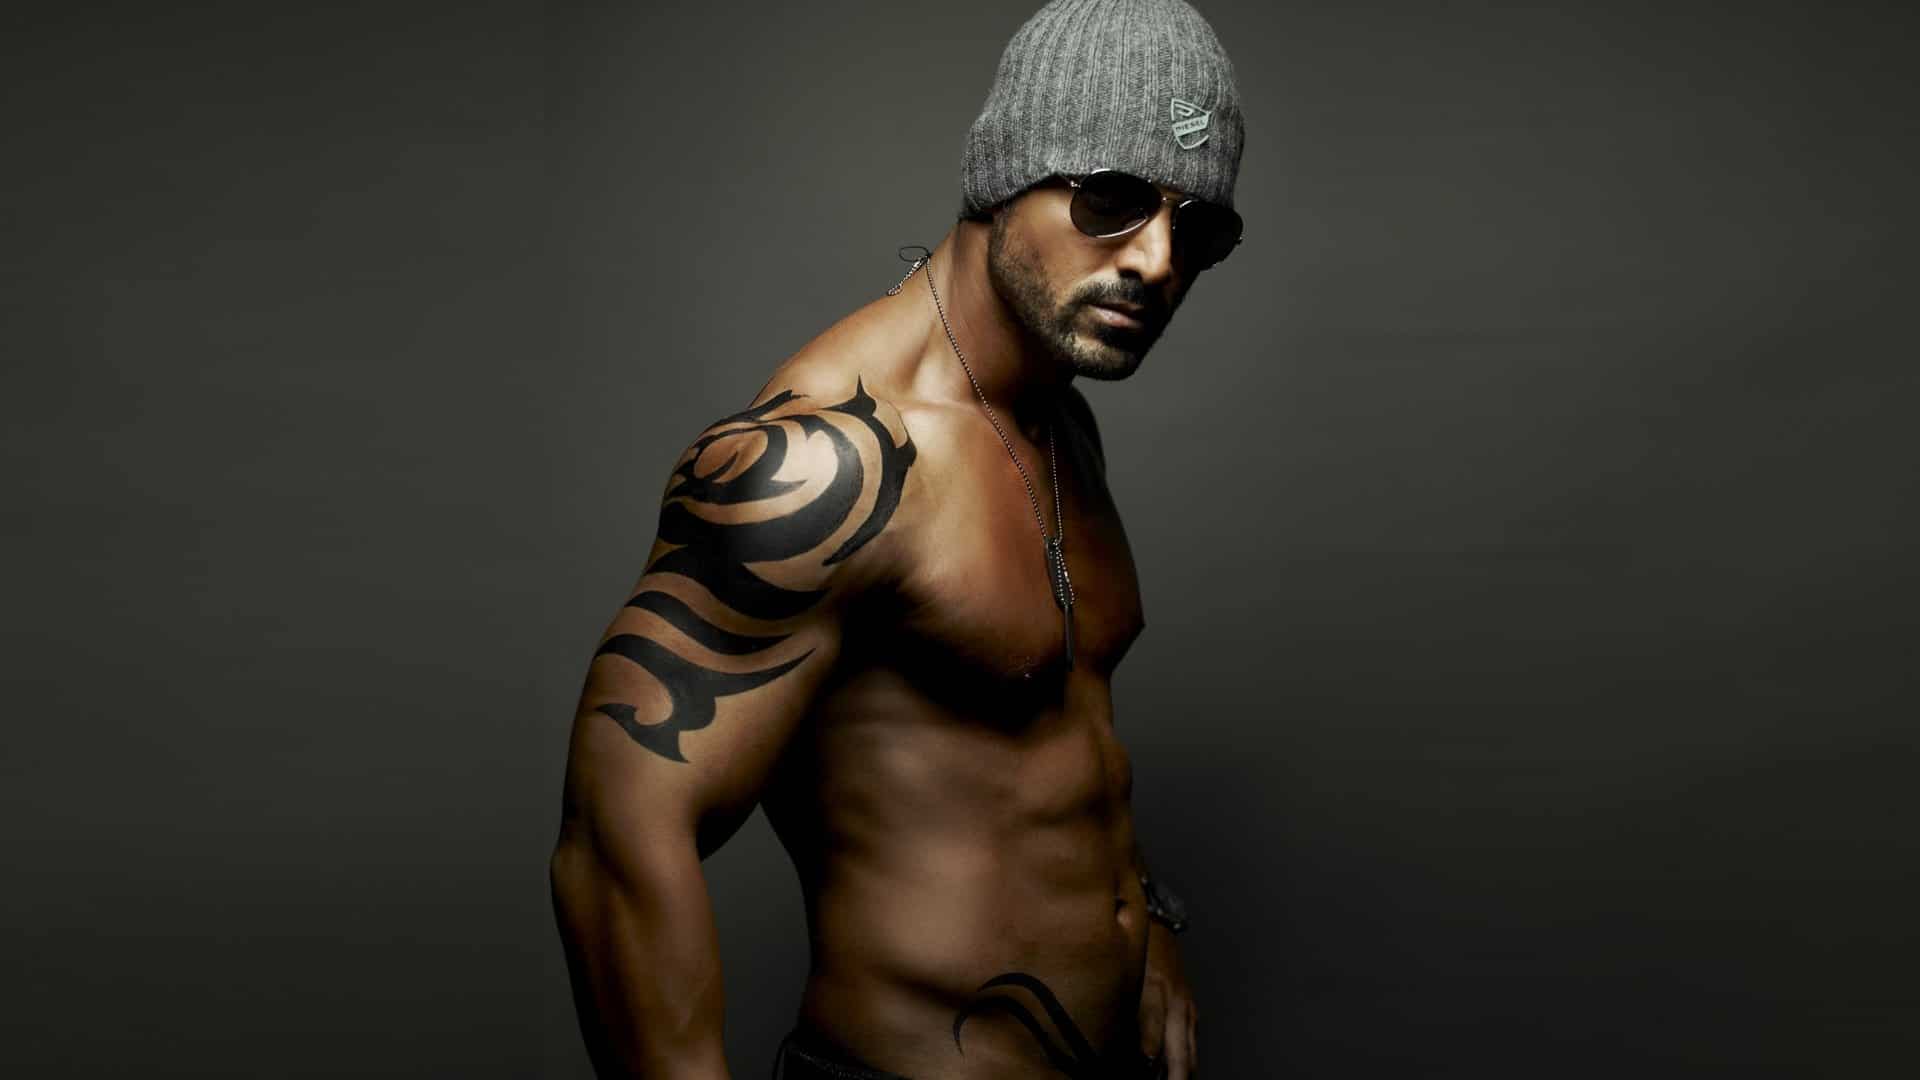 Hot And Sexy Men Wallpaper For Pc Smashing Yolo